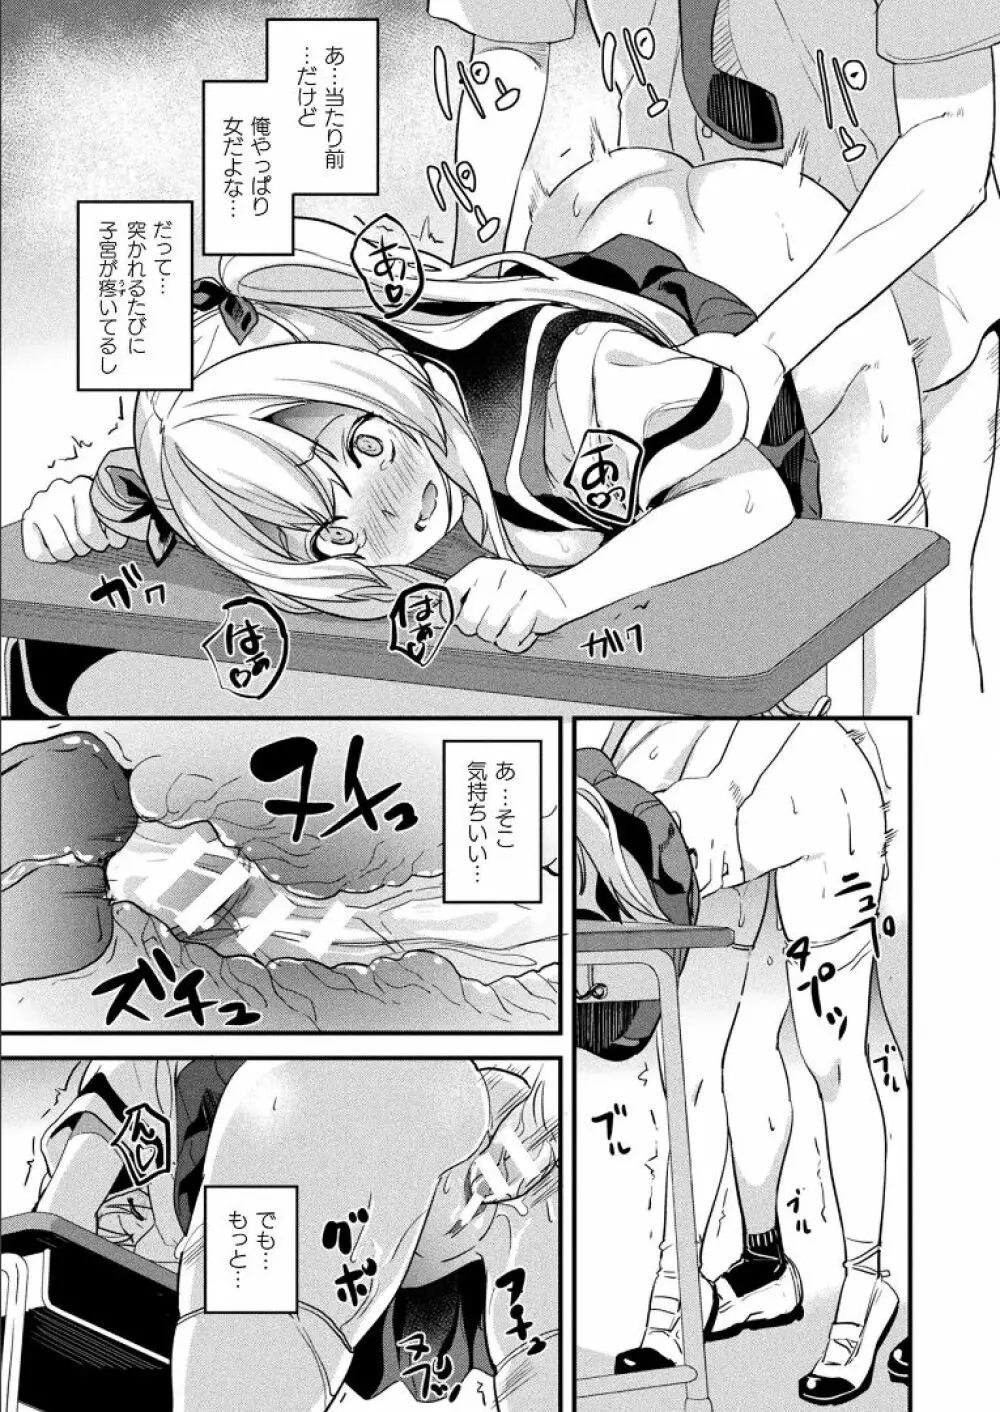 [DATE] 改変対象 第3話 (コミックアンリアル 2021年6月号 Vol.94) RAW Page.23